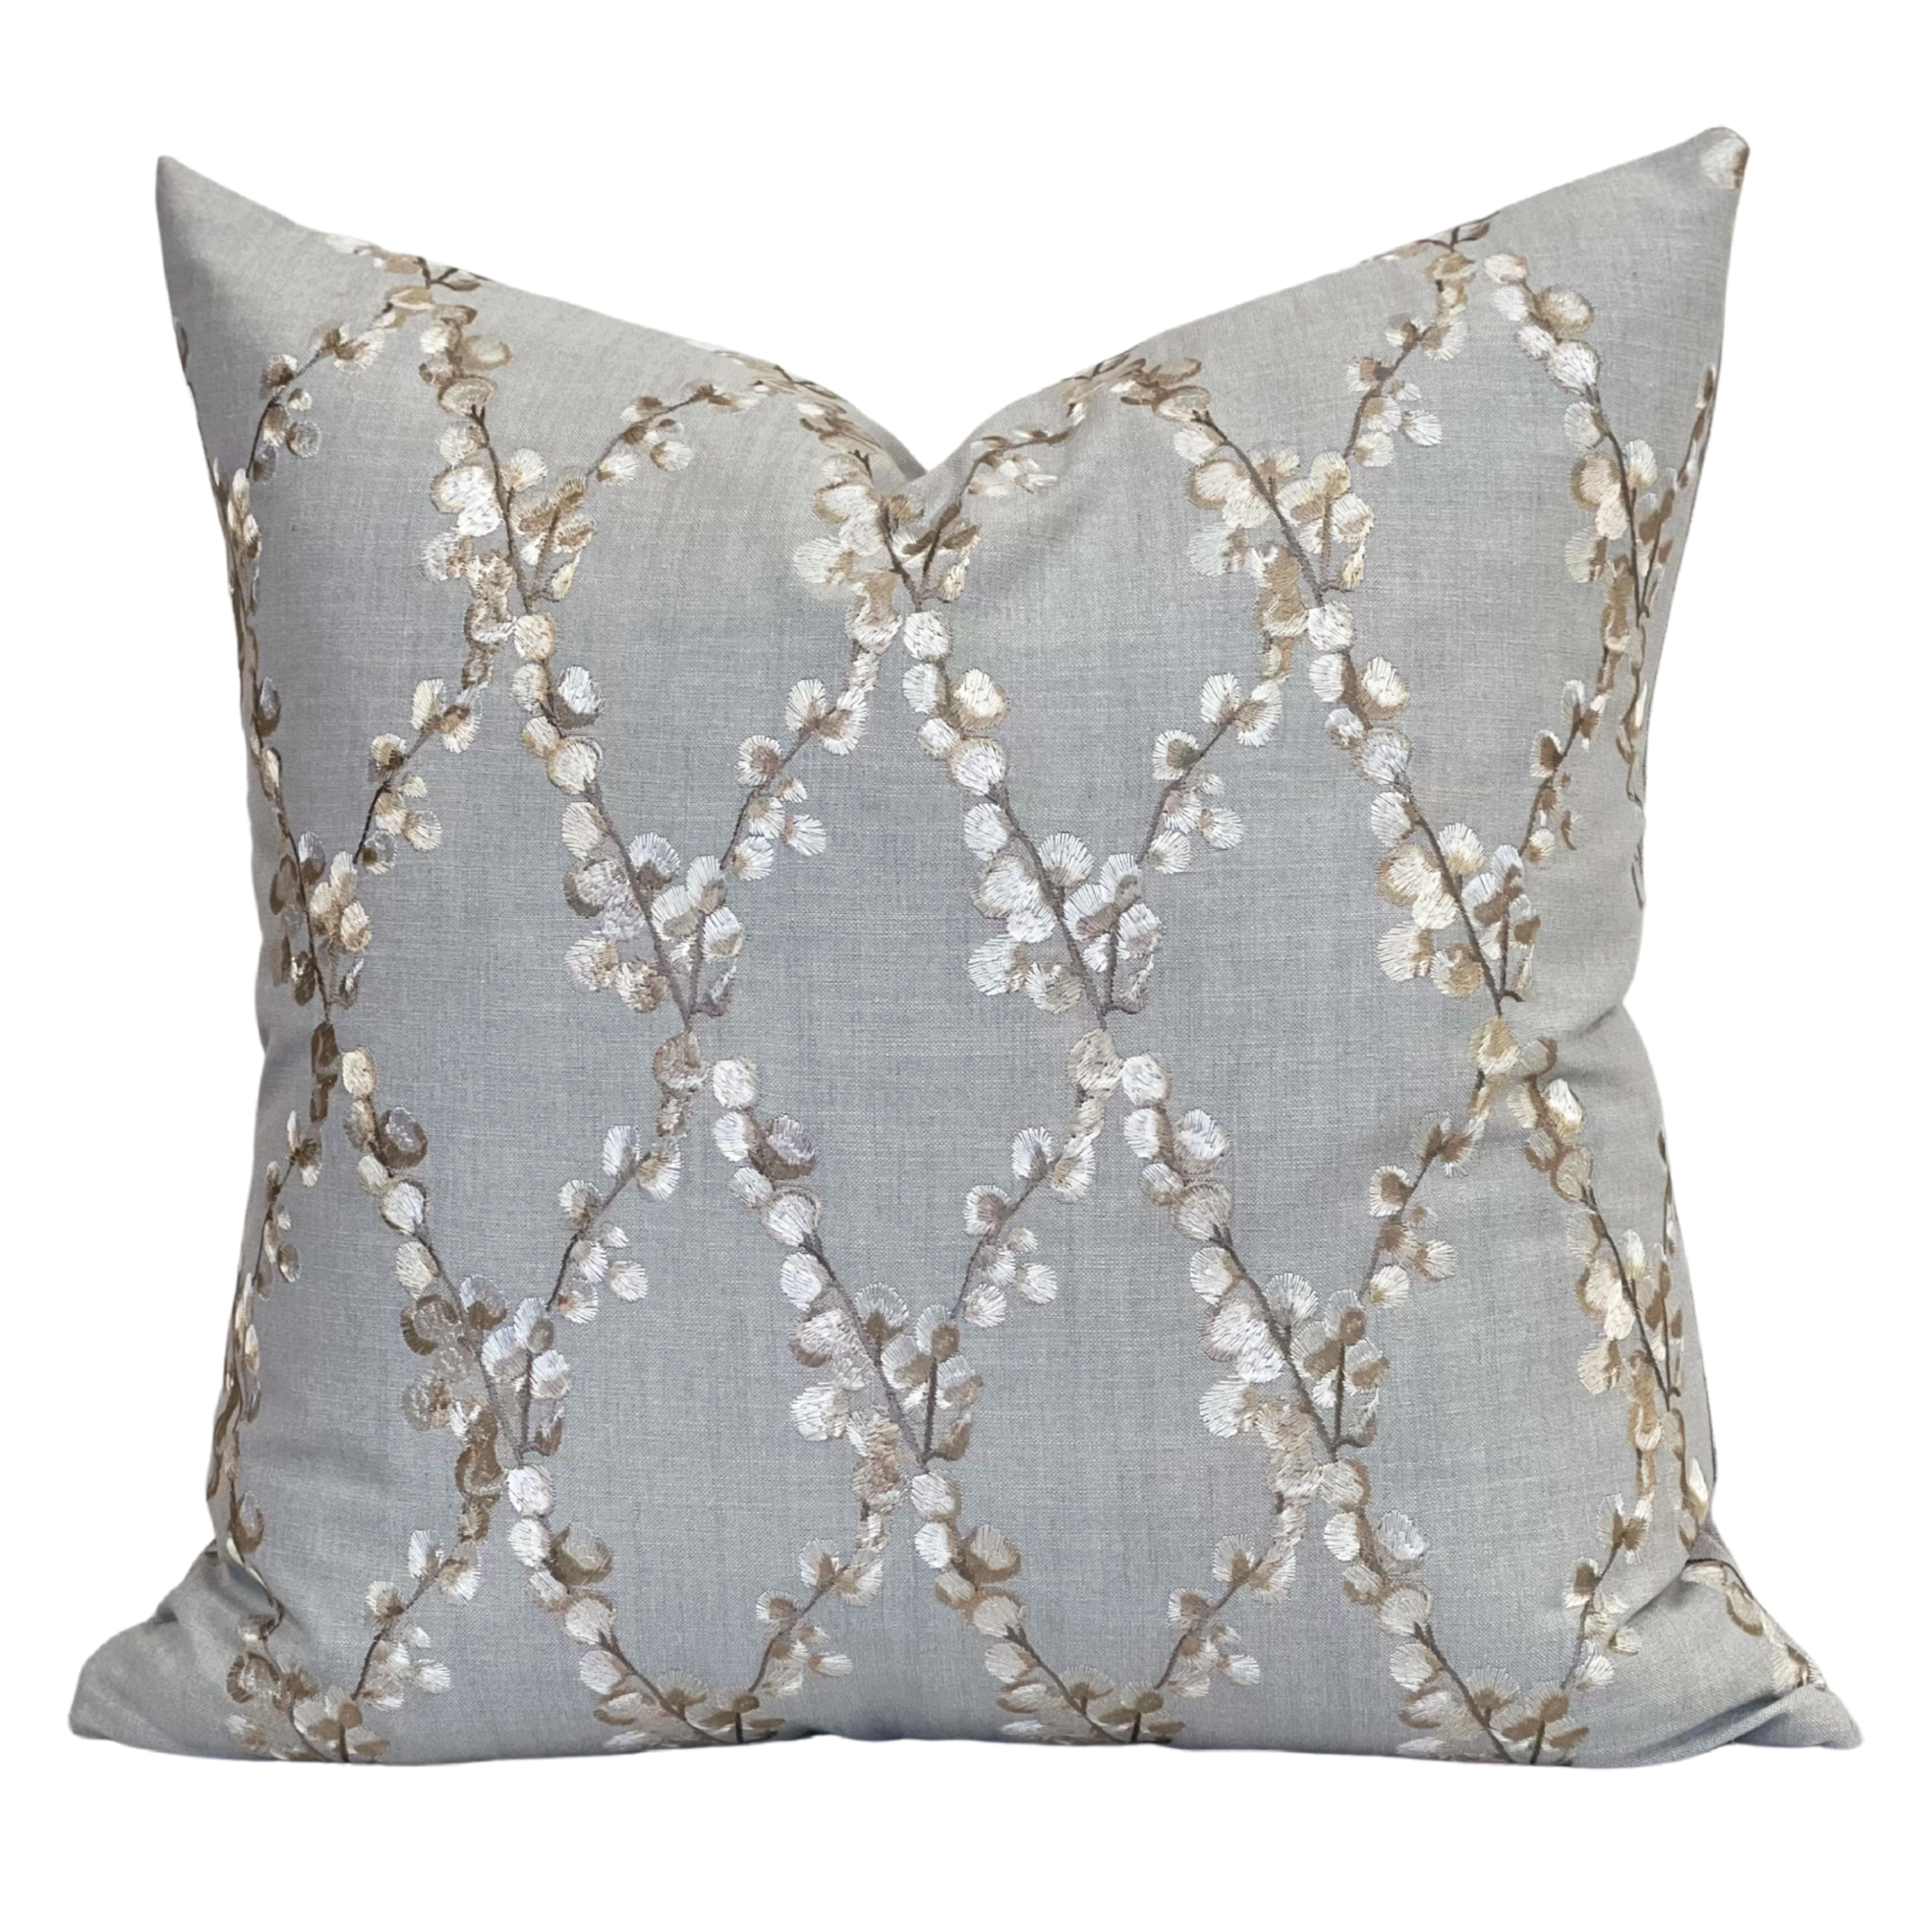 Embroidered floral blue pillow with linen fabric background